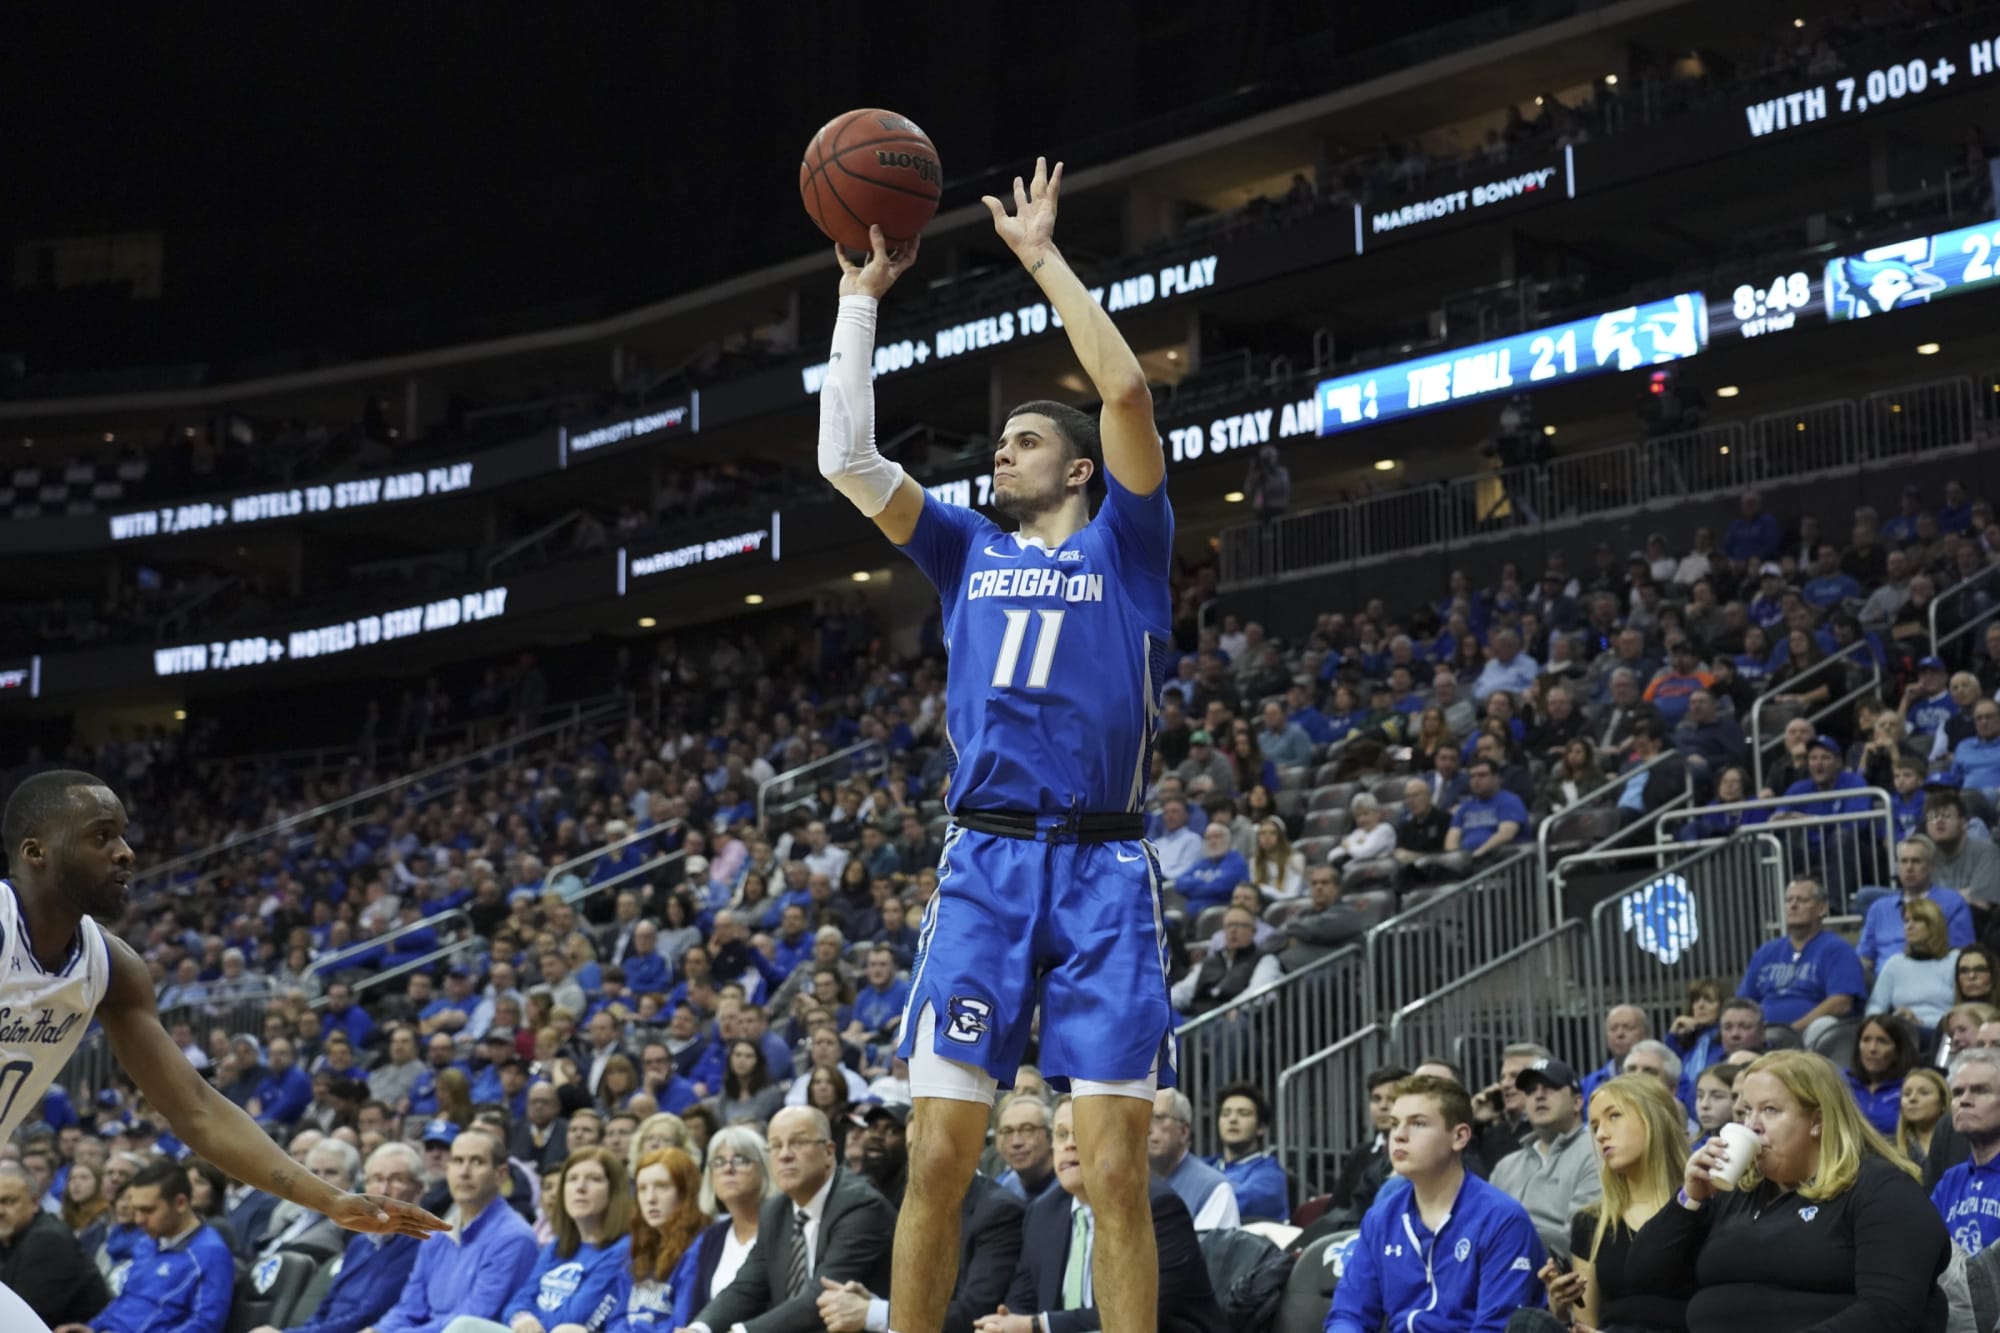 Creighton basketball 201920 season review and 20202021 early preview